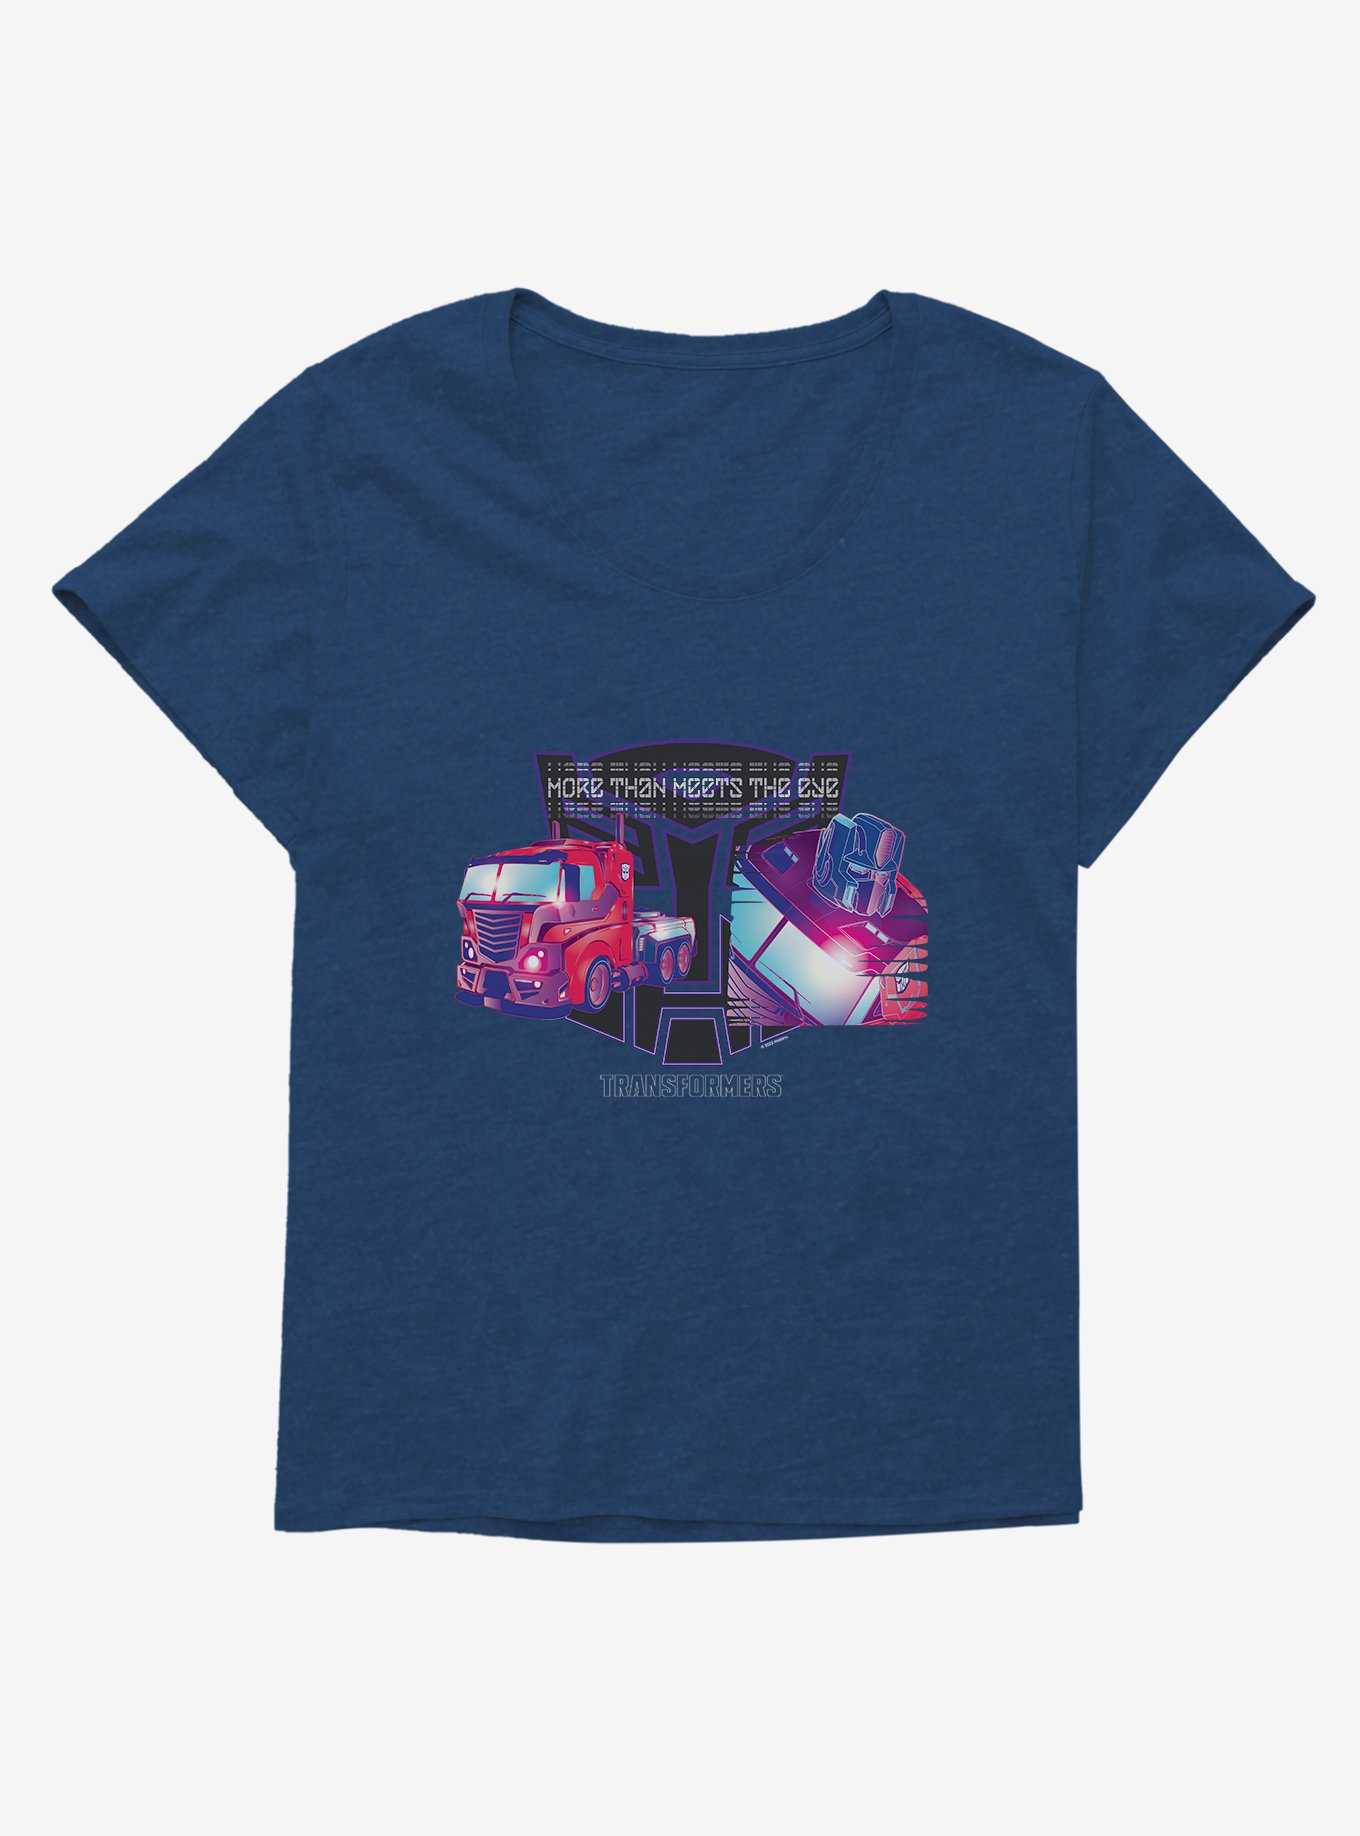 Transformers More Than Meets The Eye Girls T-Shirt Plus Size, , hi-res